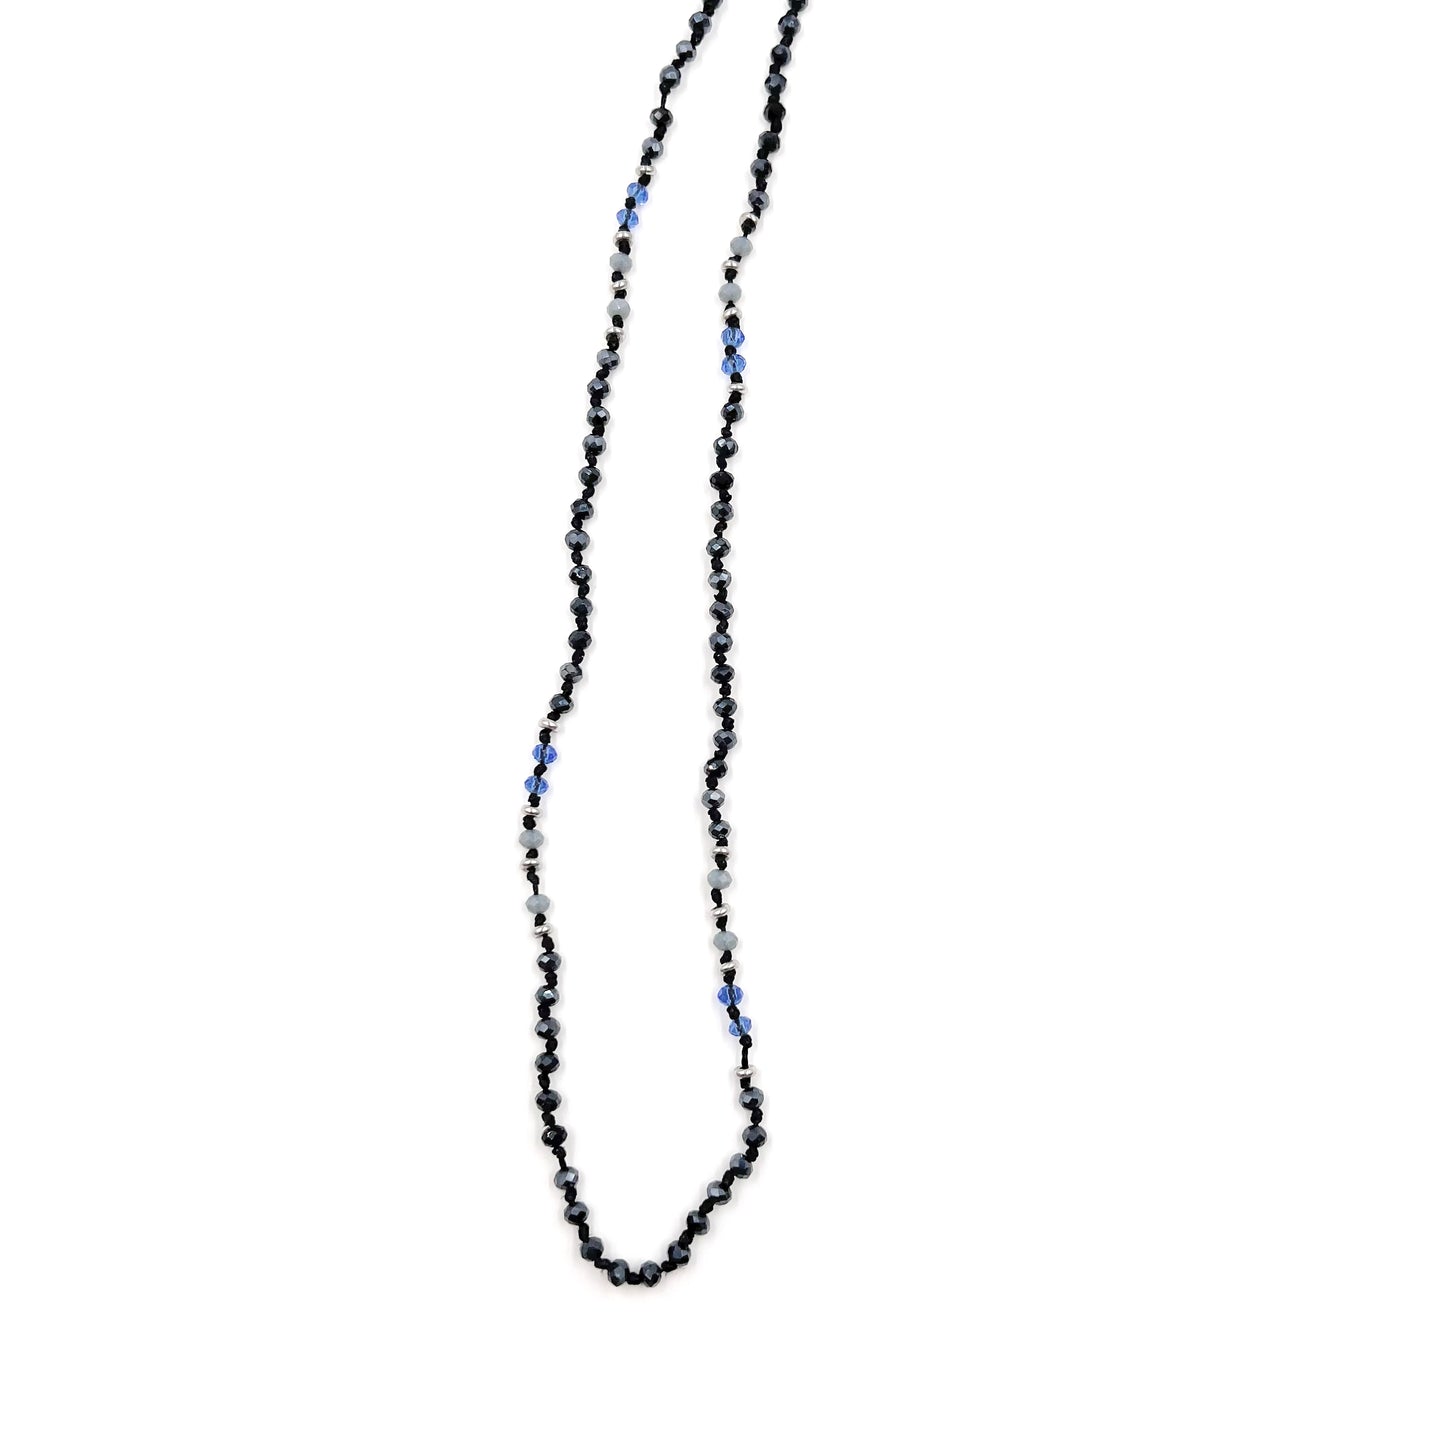 Yocasta Knotted Bead Necklace